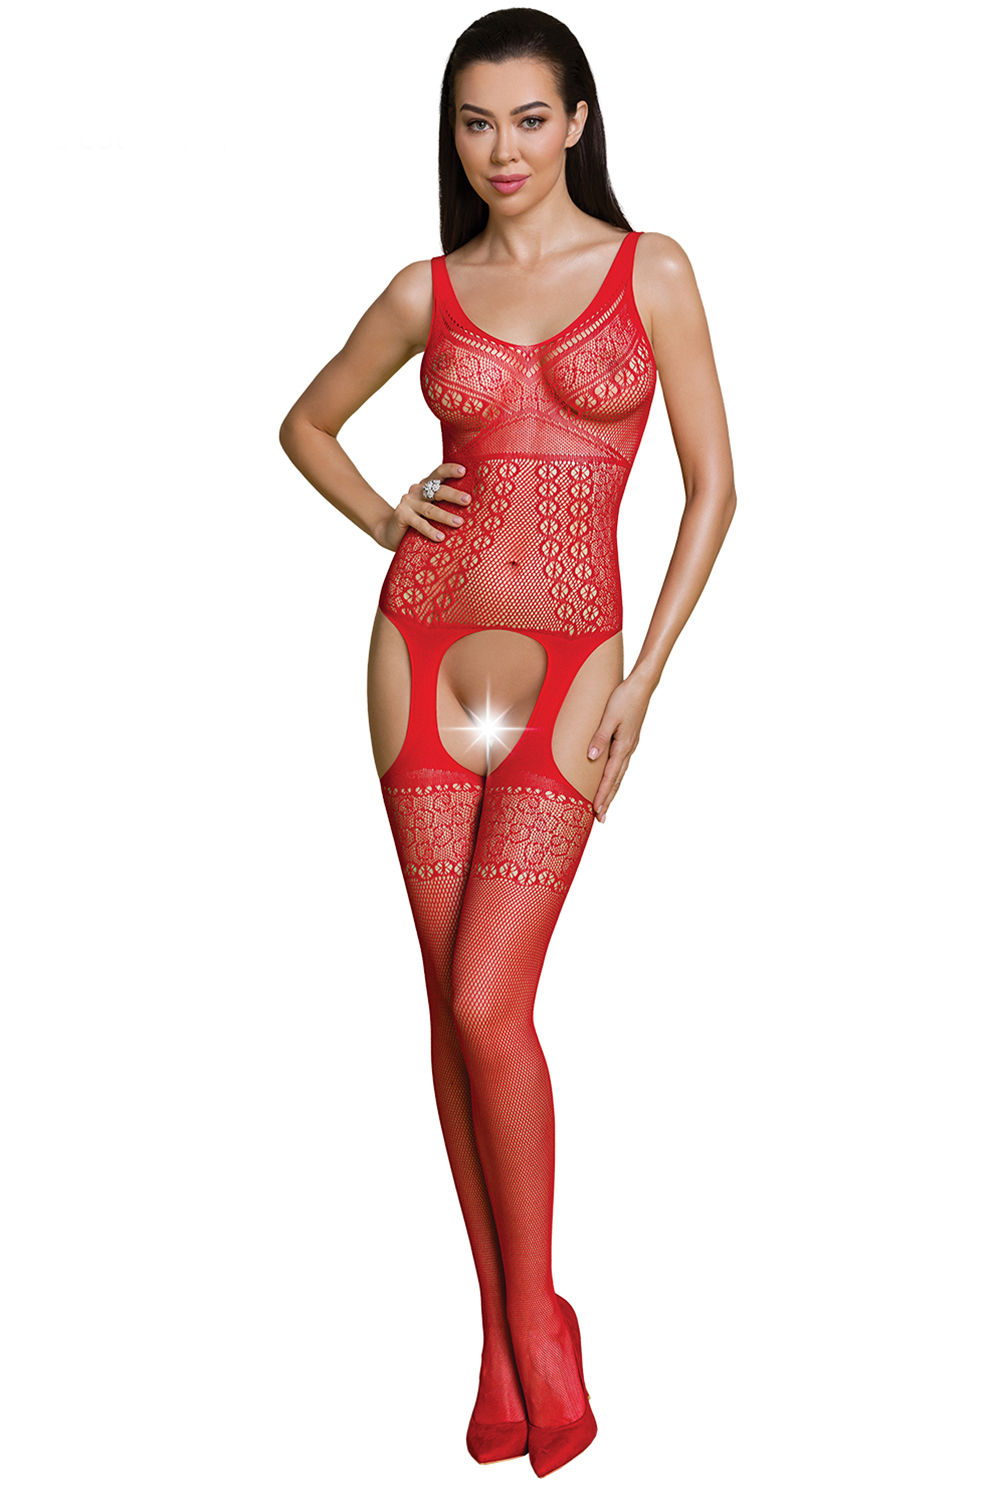 Passion ECO BS010 Body bodystocking, red